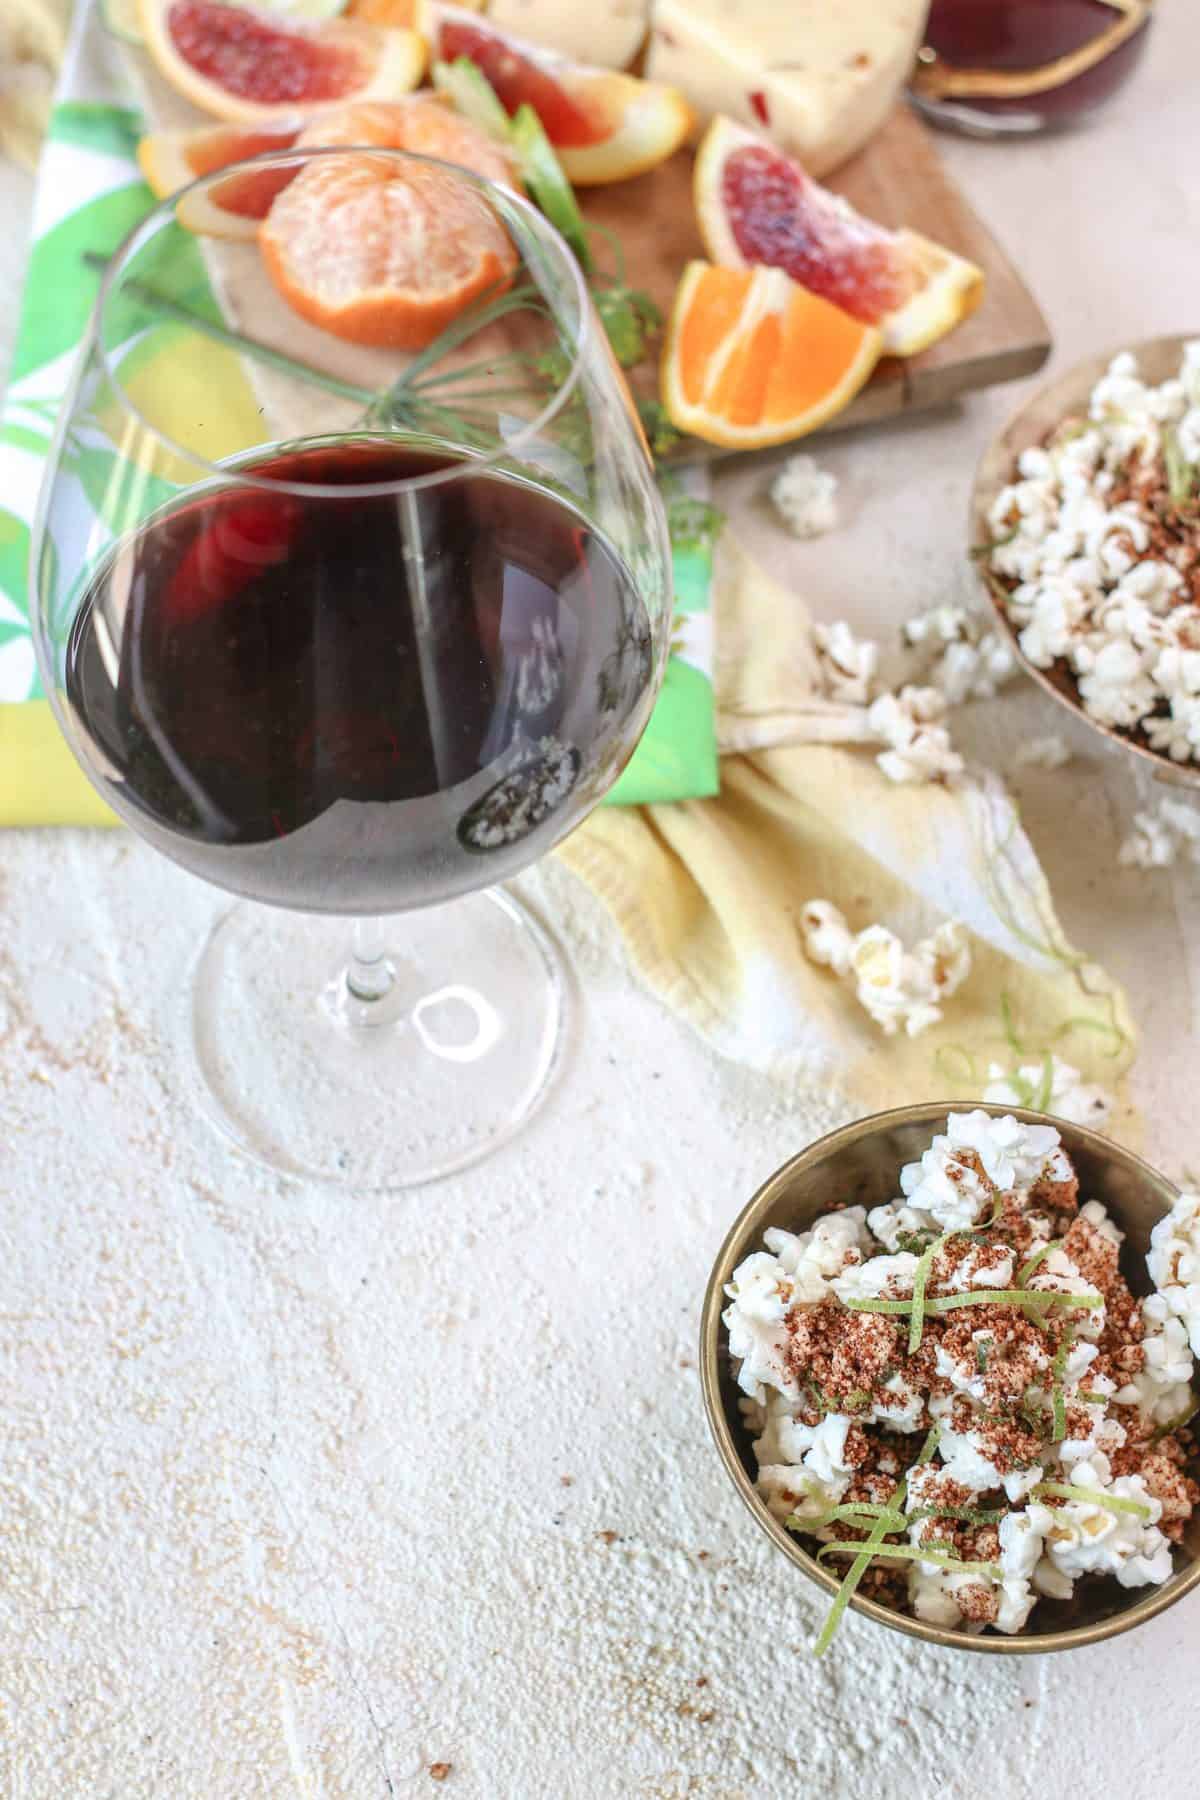 Spicy Cotija Popcorn with a glass of California Zinfandel